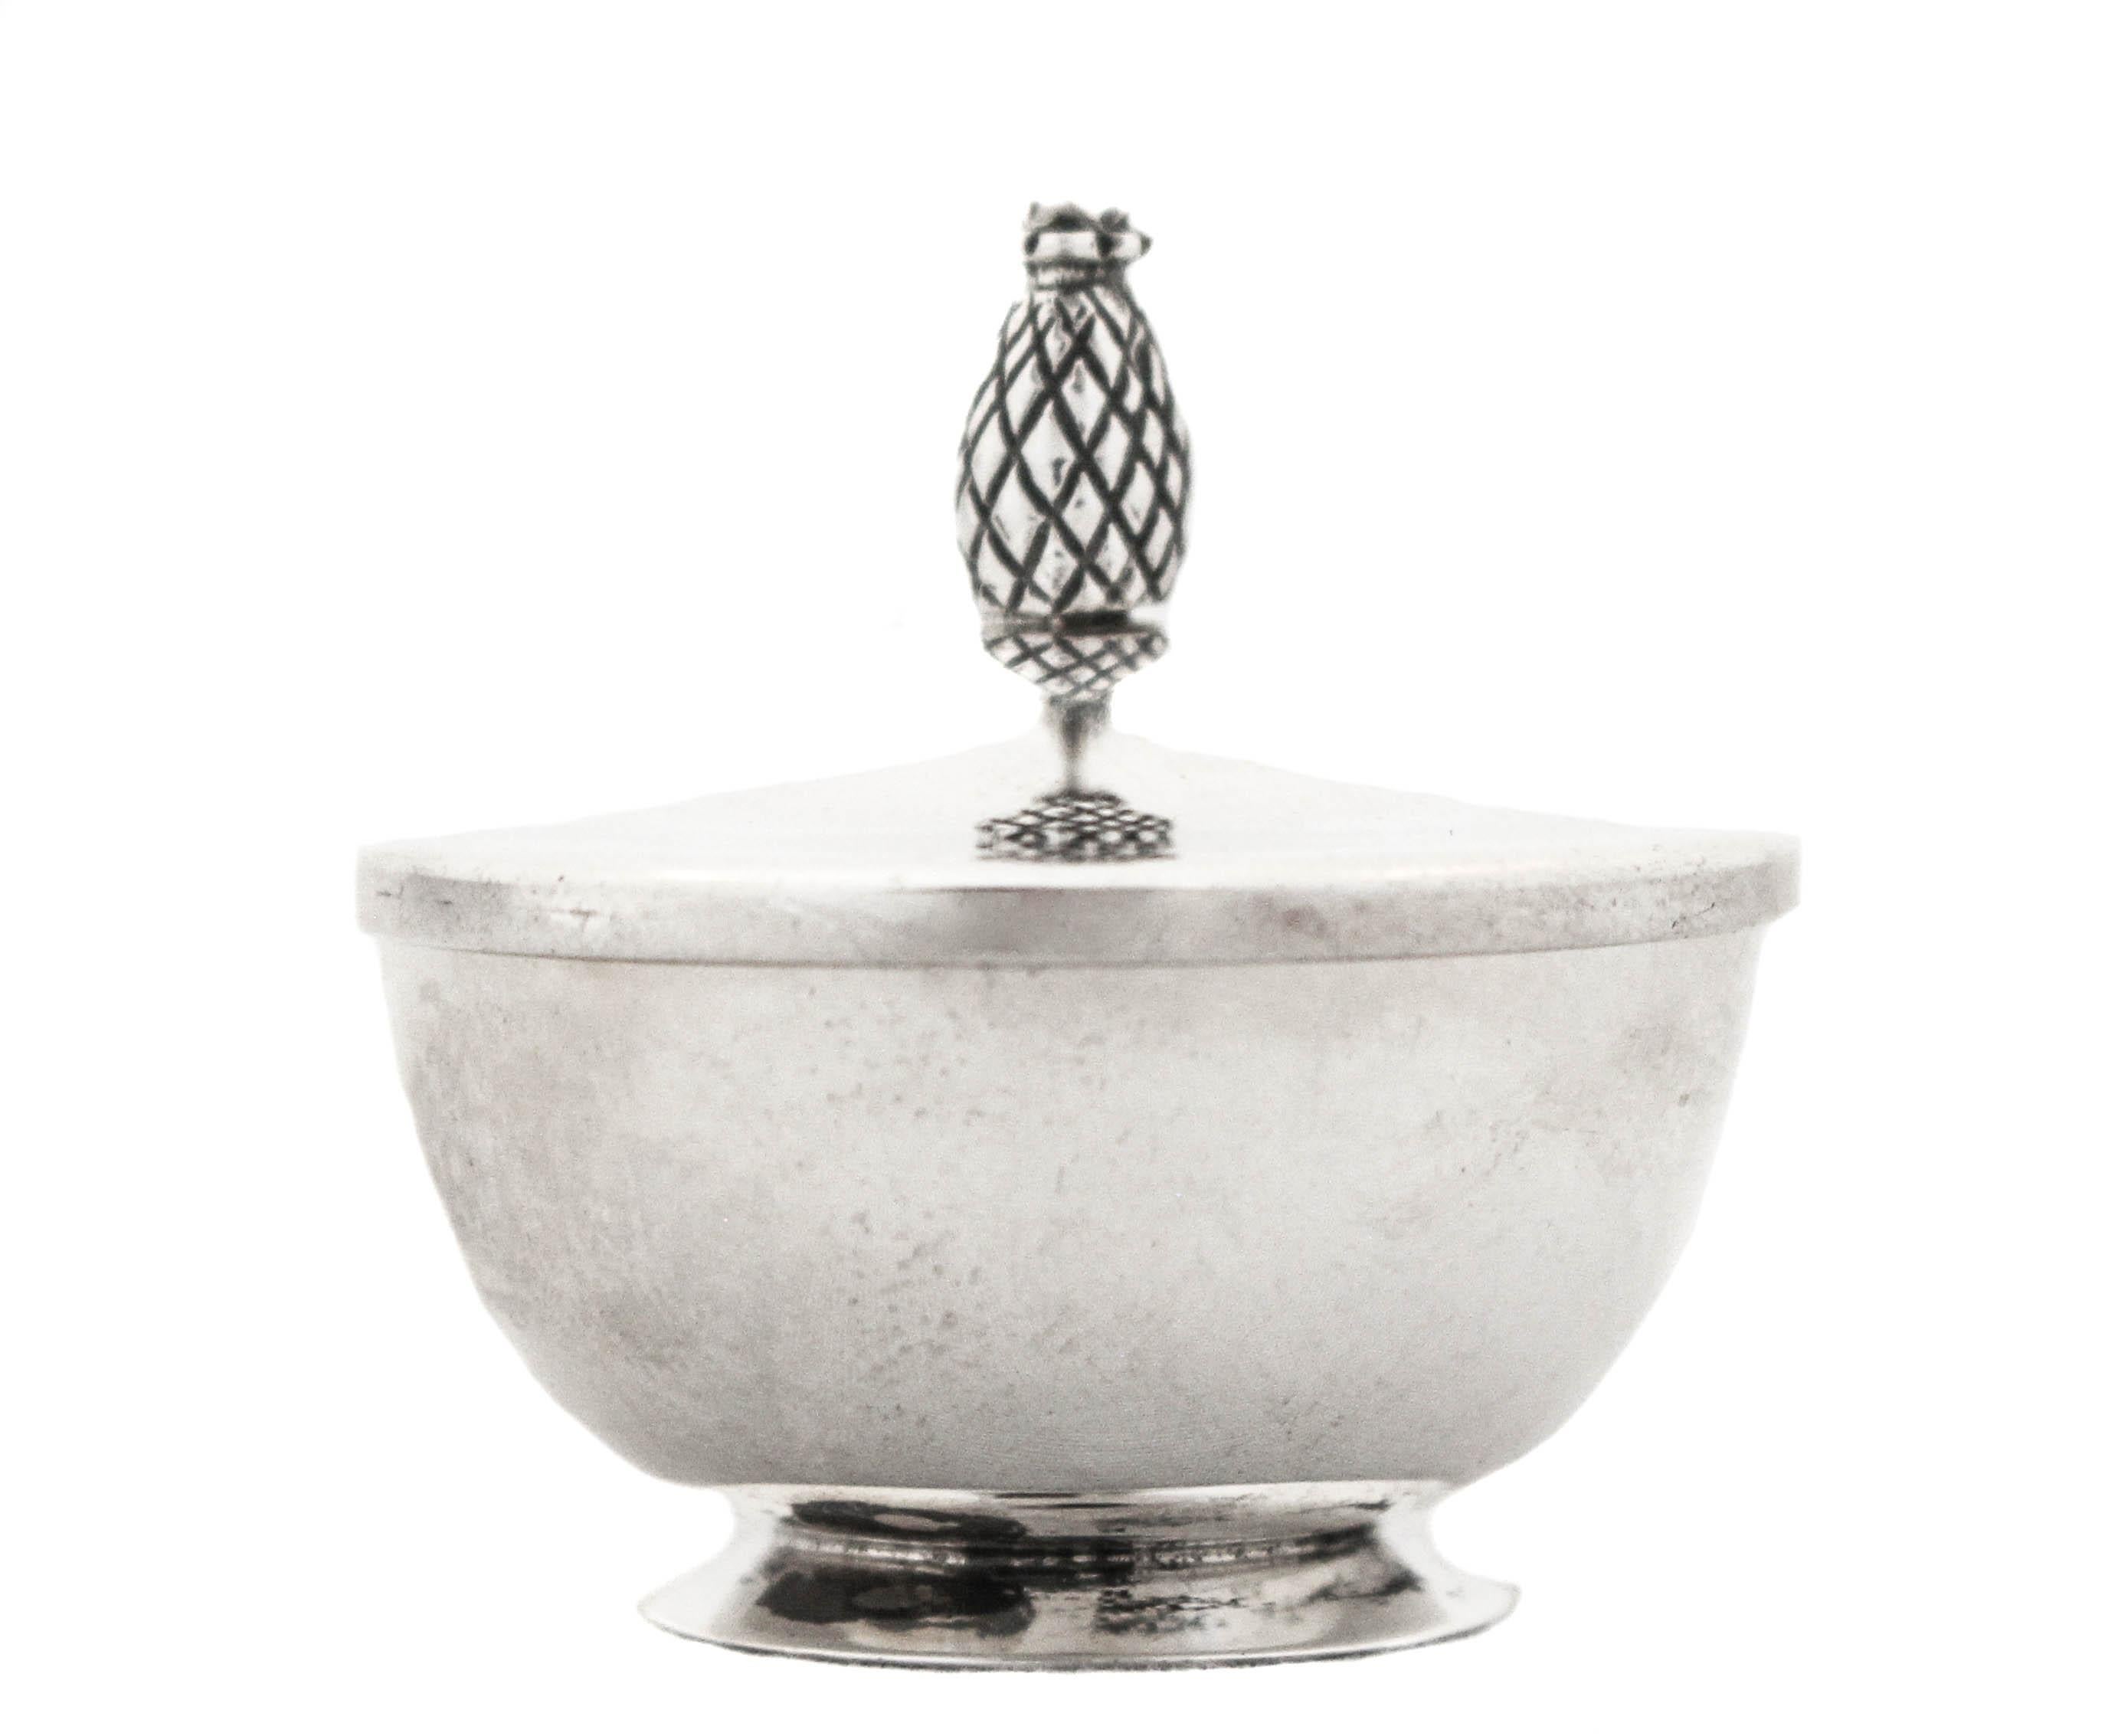 Being offered is a sterling silver salt cellar with the original lid. The finial on the lid is an acorn. An acorn symbolizes good fortune and prosperity. Acorns' association with good fortune dates back to Norse mythology, where the acorn